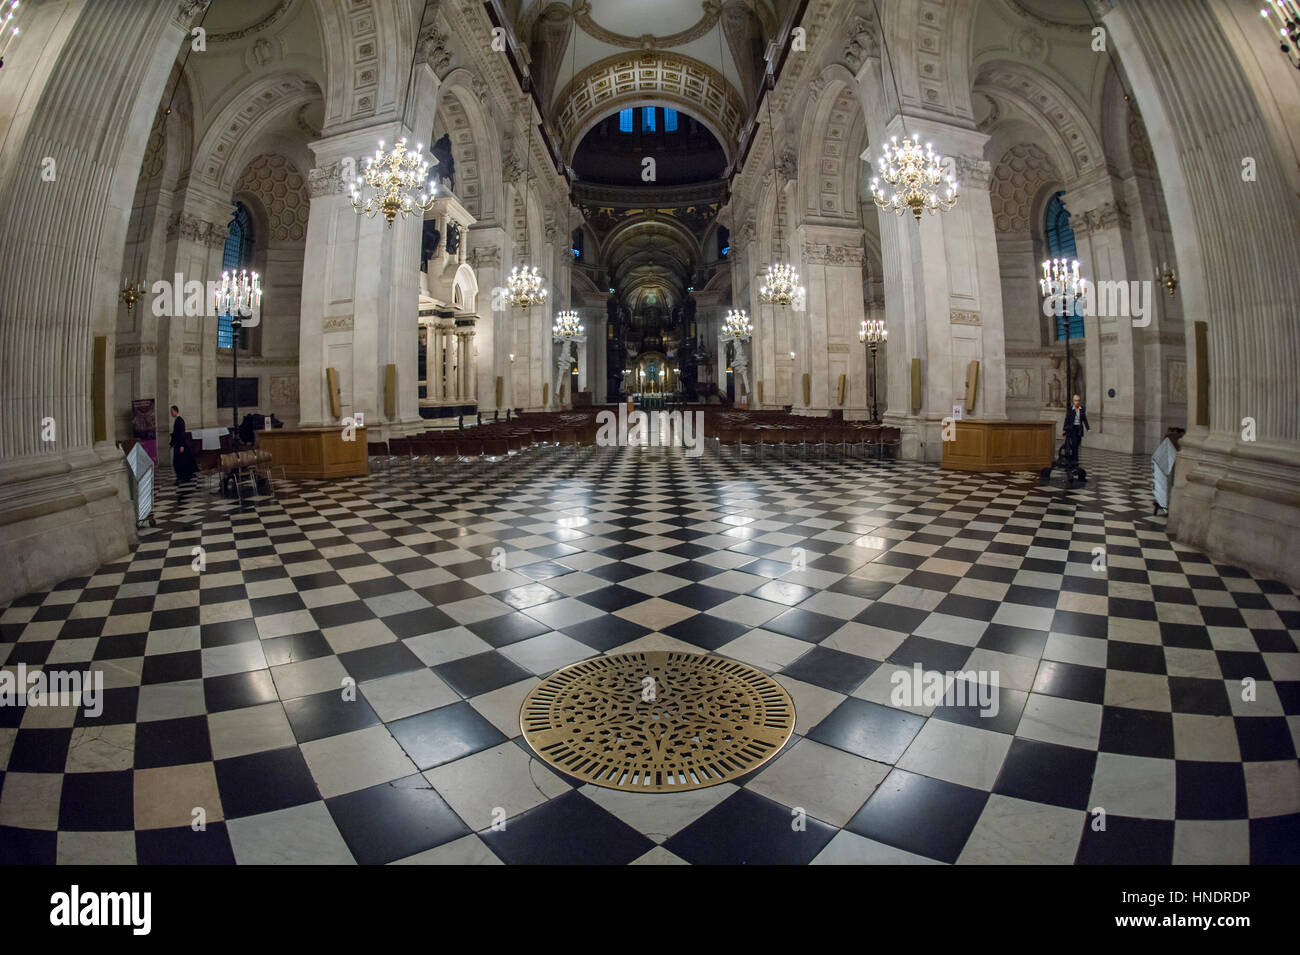 The Interior of St Paul's Cathedral Stock Photo